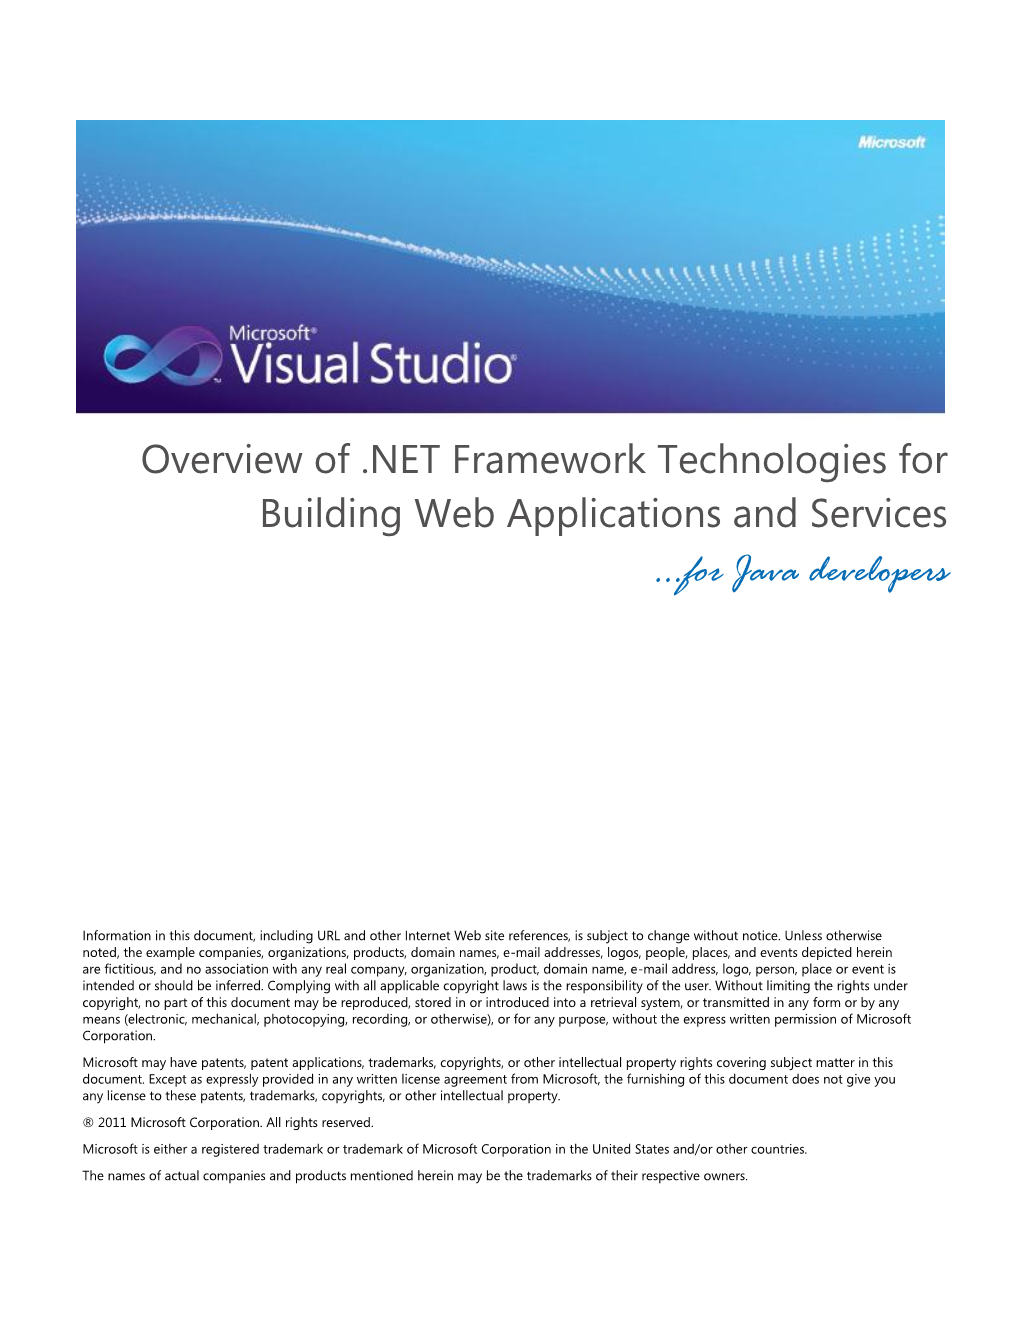 Overview of .NET Framework Technologies for Building Web Applications and Services …For Java Developers